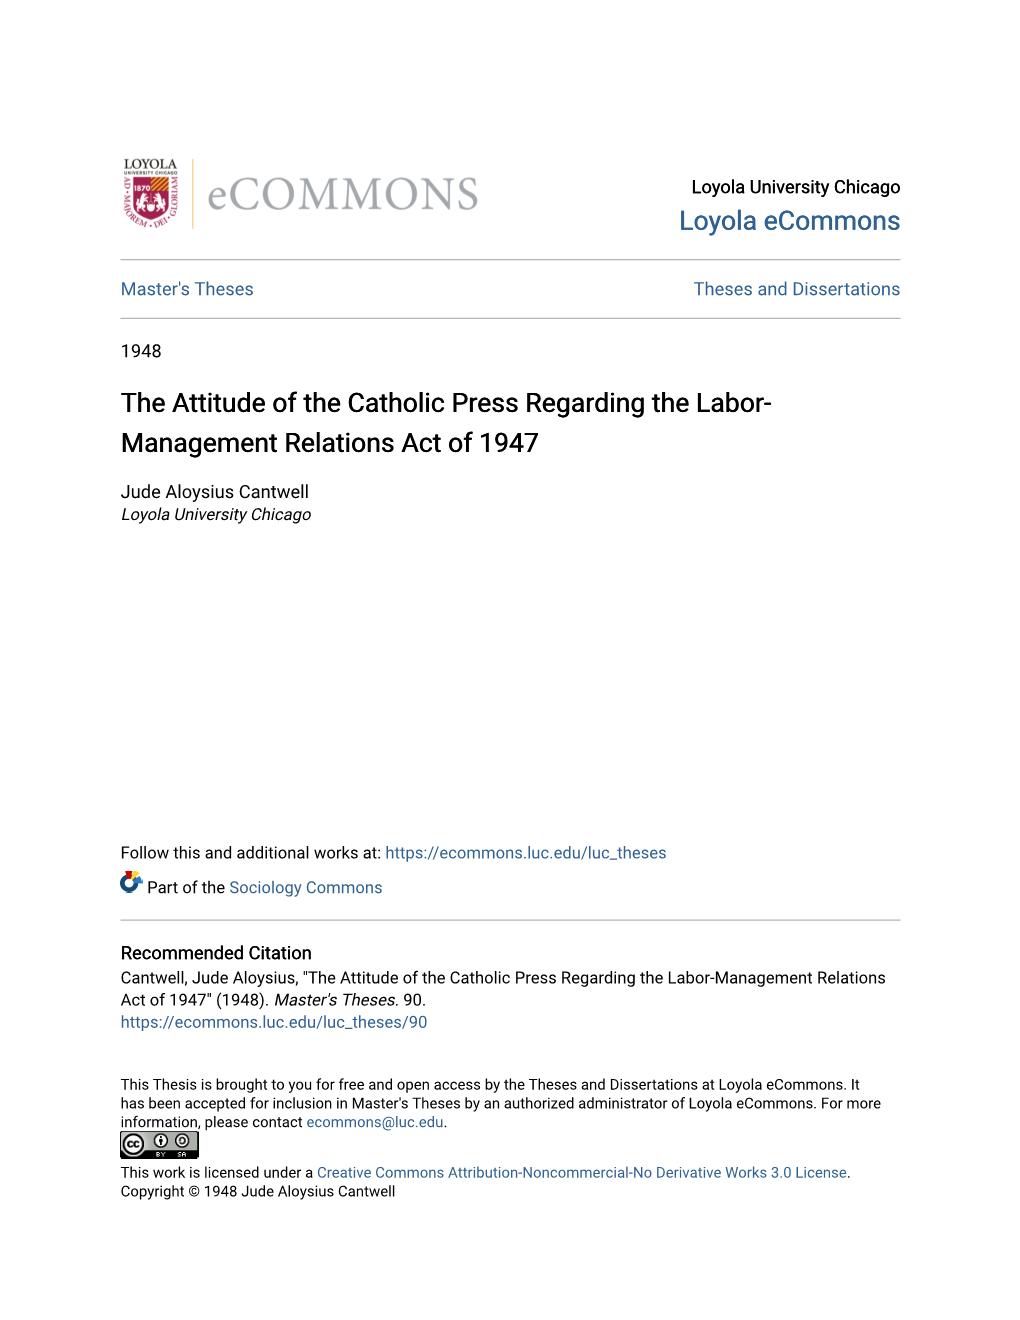 The Attitude of the Catholic Press Regarding the Labor-Management Relations Act of 1947" (1948)